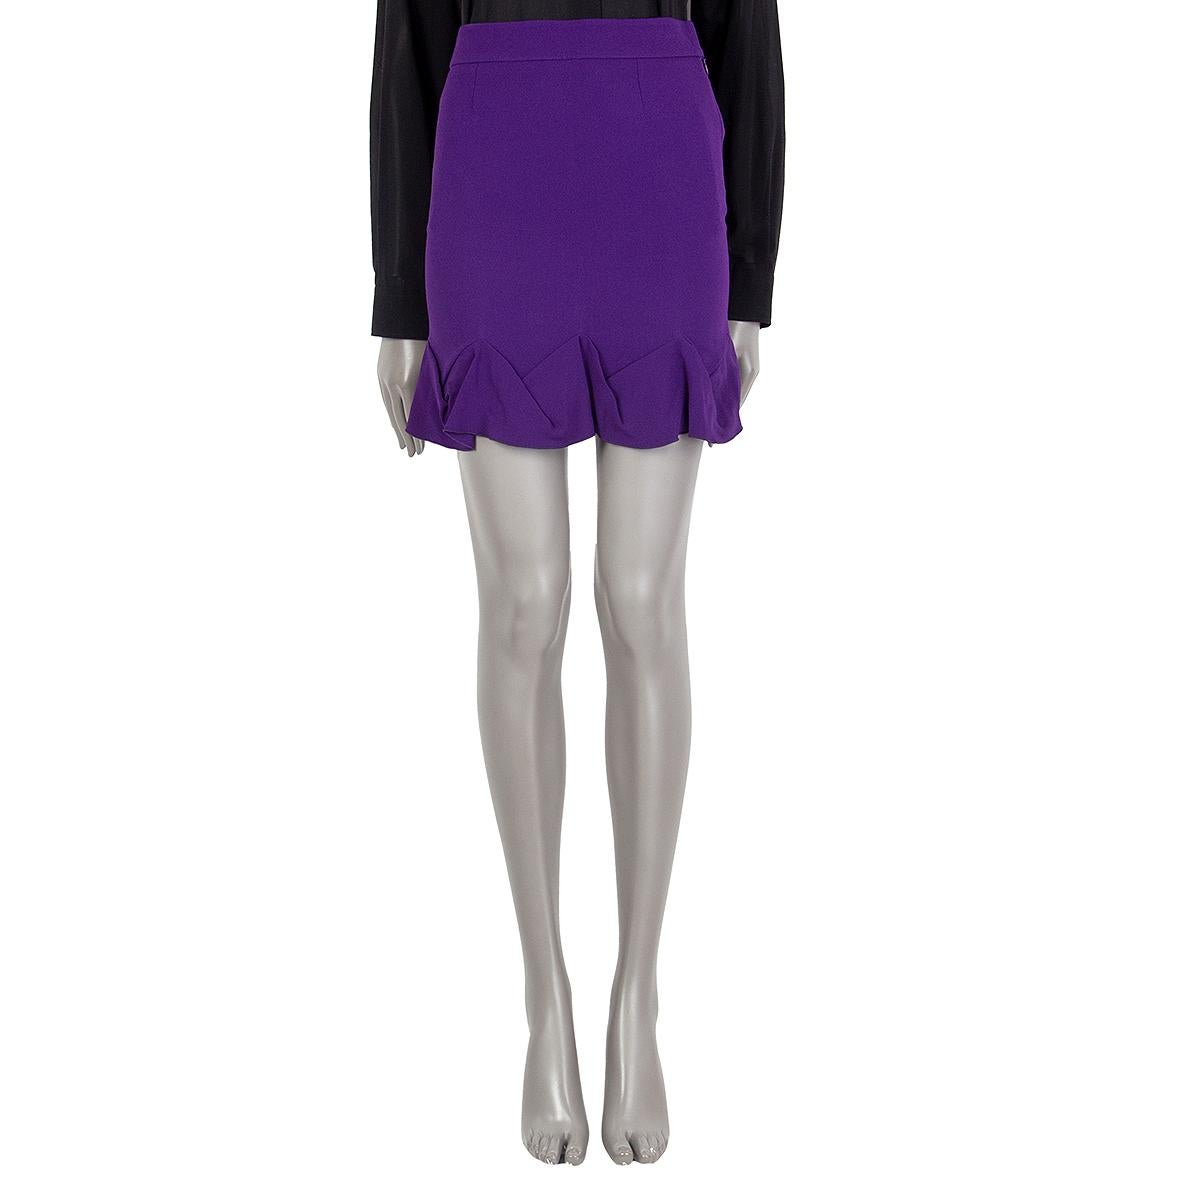 100% authentic Stella McCartney flared bottom skirt in purple rayon (64%), elastane (4%) and acetate (32%). Closes on the back with a zipper. Unlined. Has been worn and is in excellent condition. 

Measurements
Tag Size	36
Size	XS
Waist From	70cm